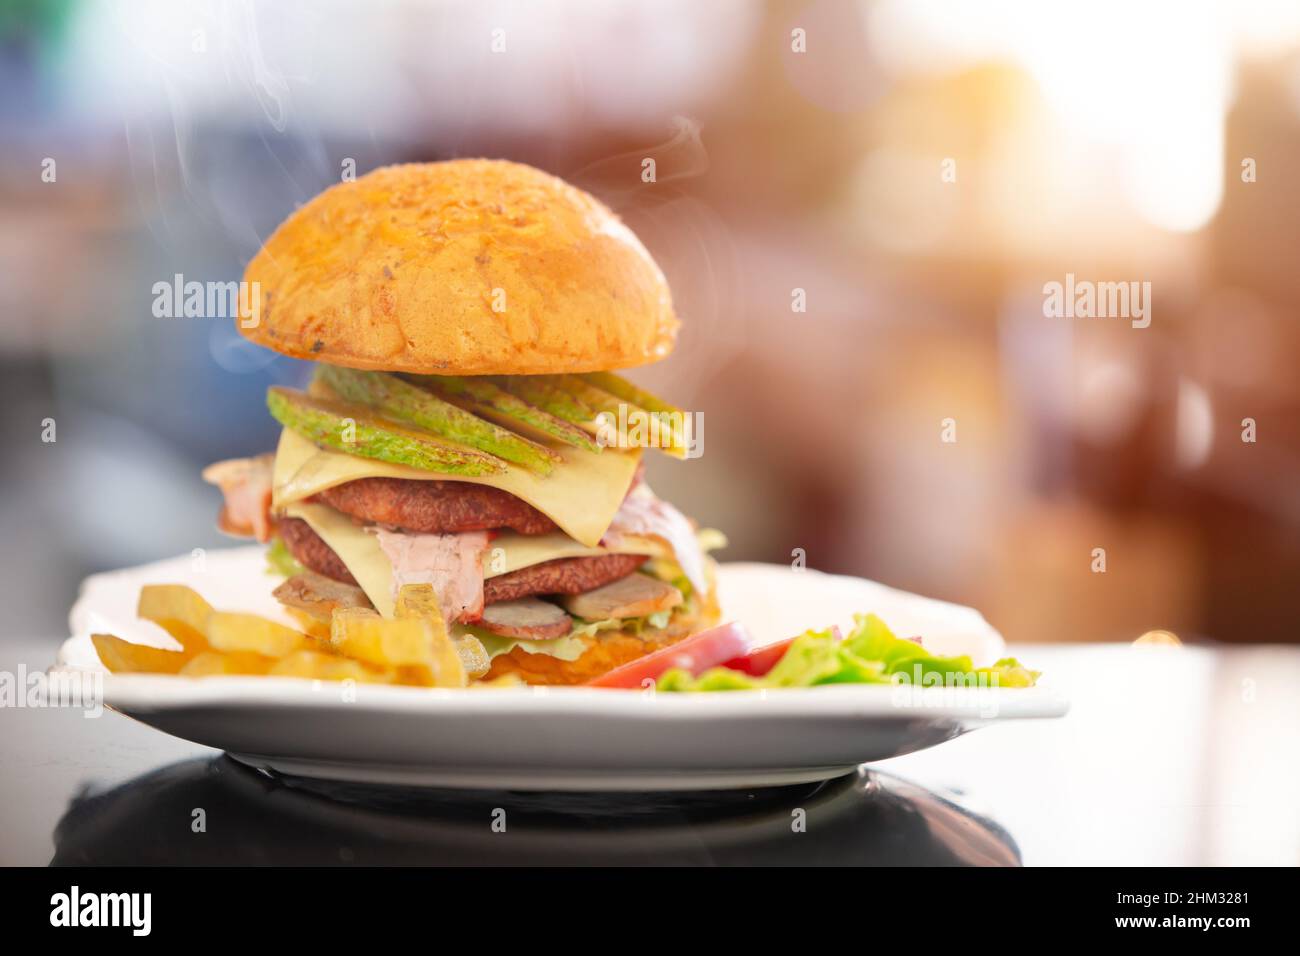 Hamburger or Cheeseburger American style food hot fresh tasty and delicious eat meal Stock Photo